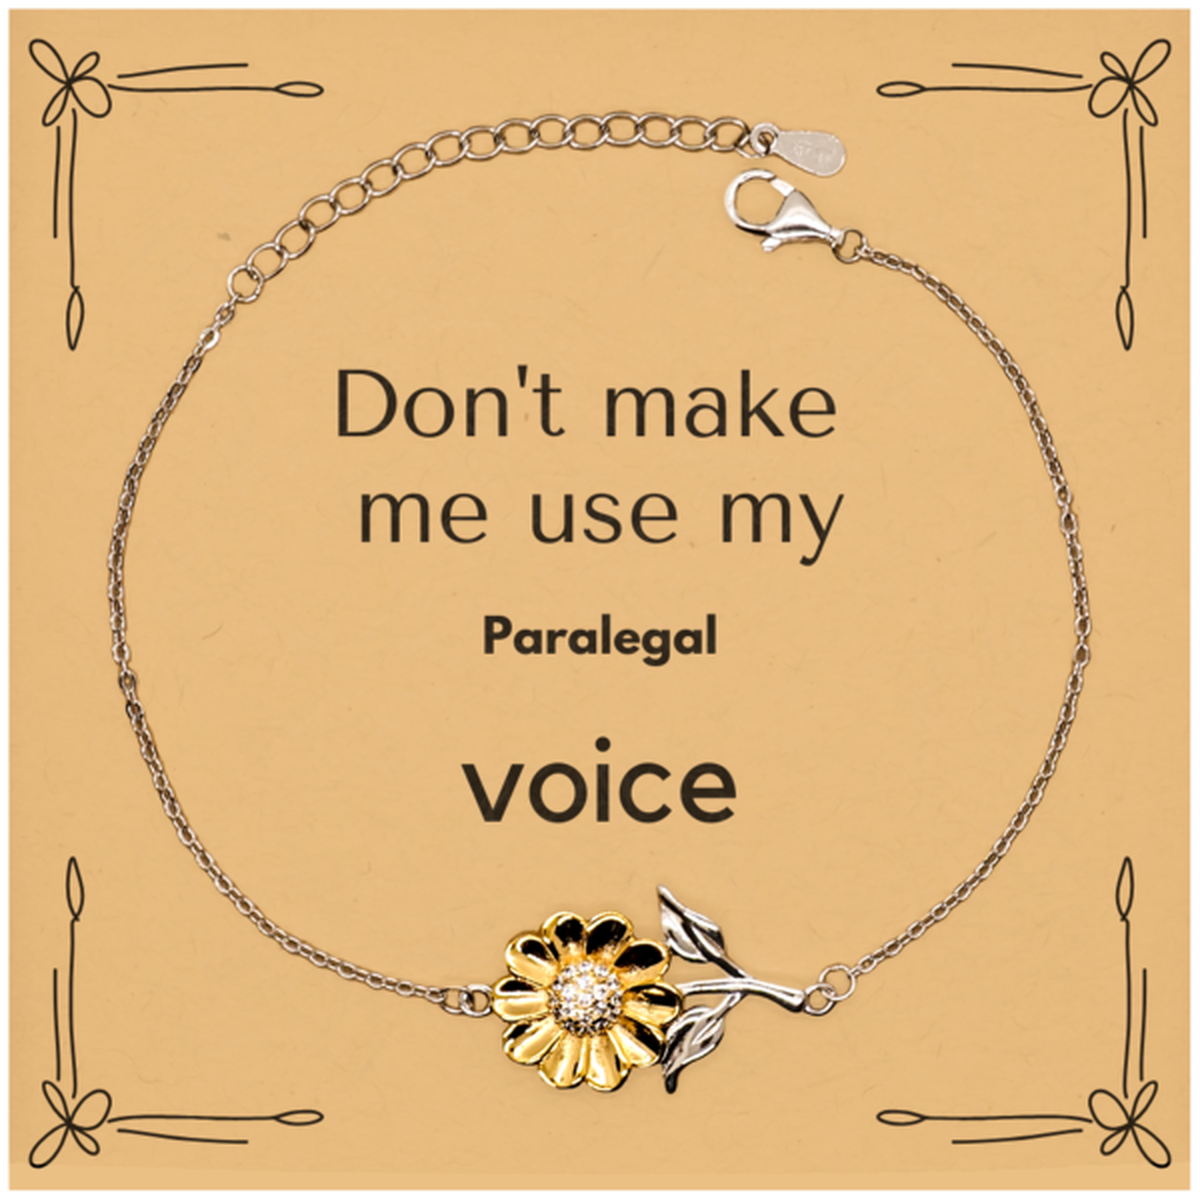 Don't make me use my Paralegal voice, Sarcasm Paralegal Card Gifts, Christmas Paralegal Sunflower Bracelet Birthday Unique Gifts For Paralegal Coworkers, Men, Women, Colleague, Friends